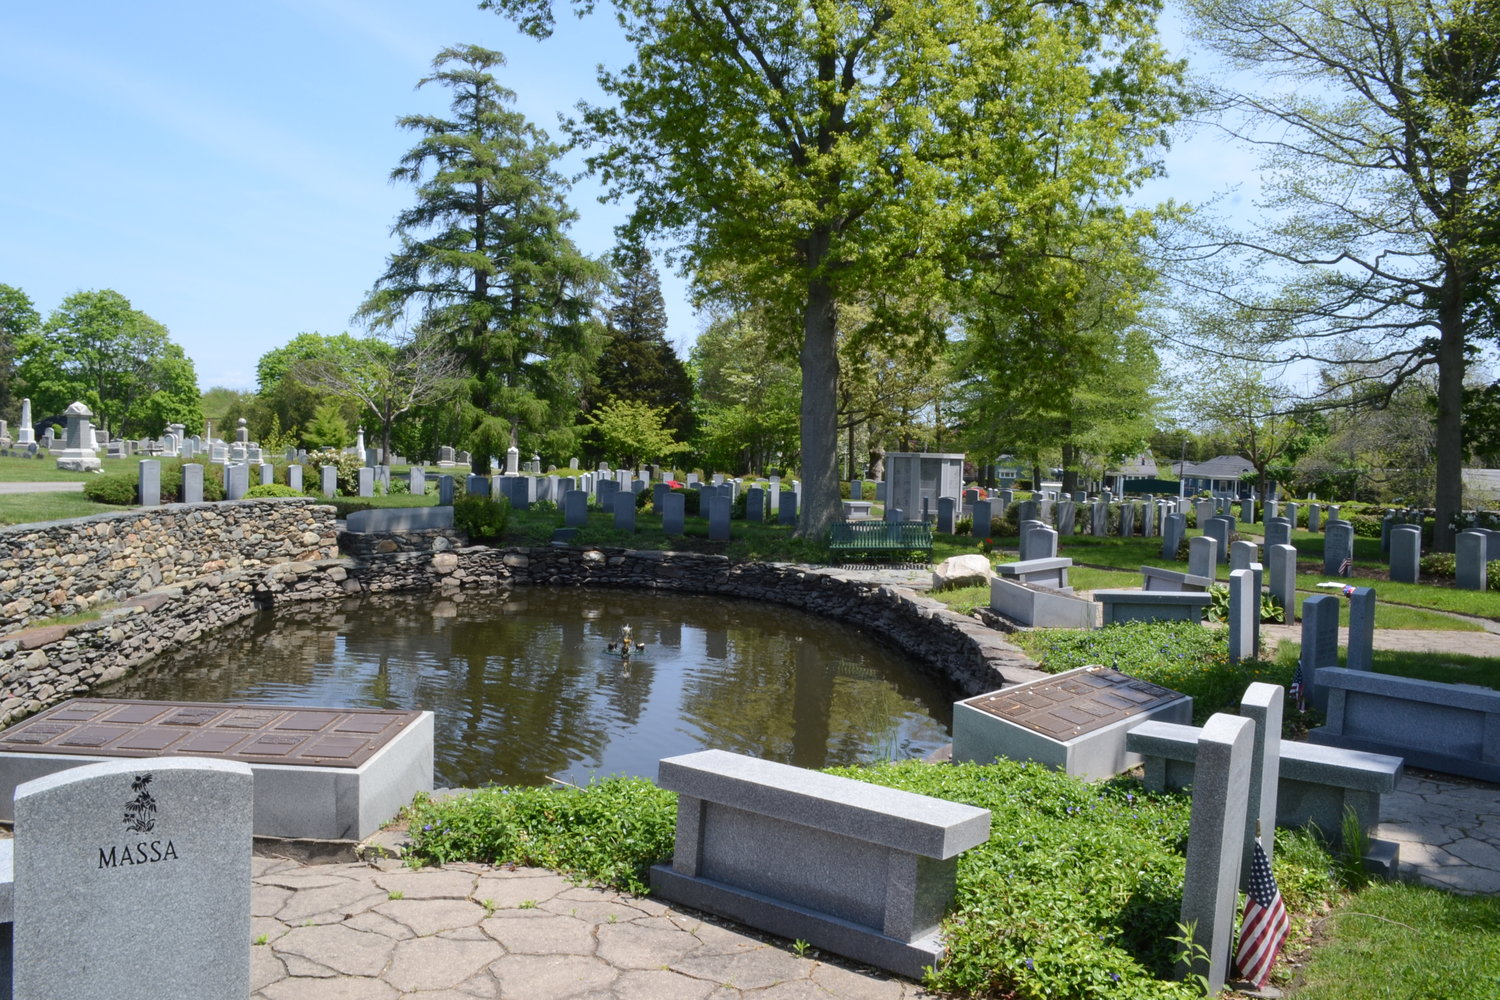 Dedicated to the late Ralph E. Peters, the cremation garden at the North Burial Ground was finished in November of 2008, and has enough space to hold the cremains of 1,400 individuals as opposed to 50 traditional graves.